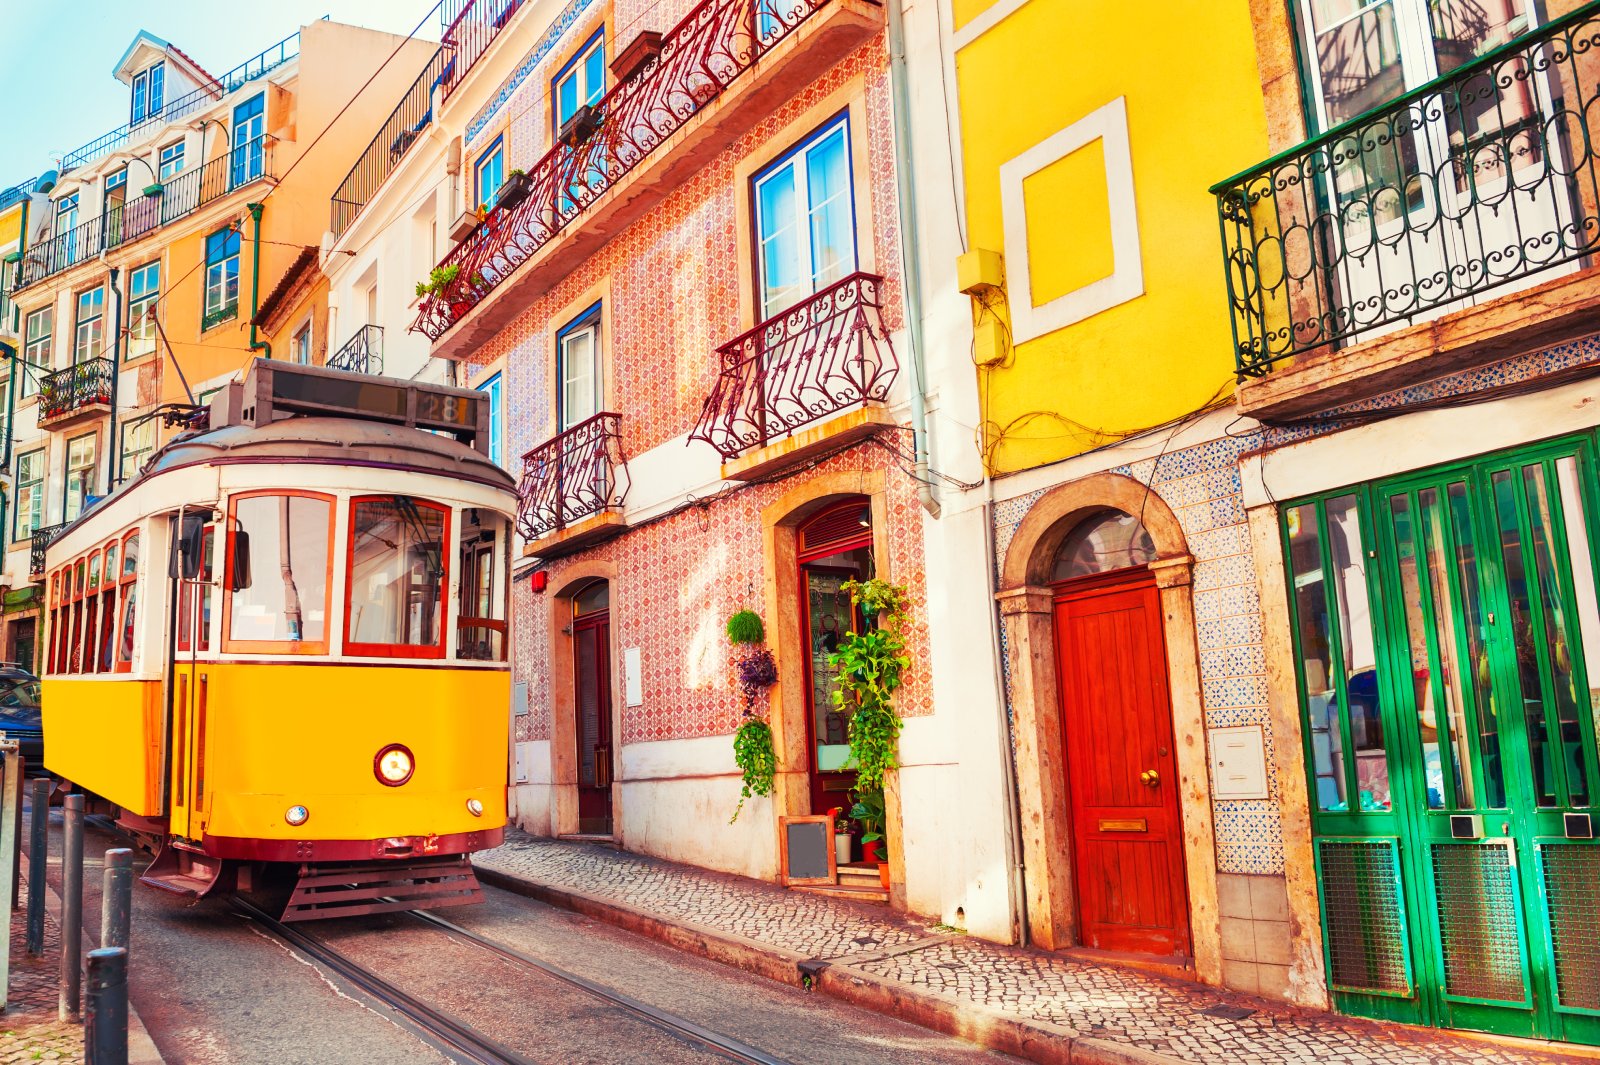 <p><span>One of the most popular locations for digital nomads is Portugal, an affordable country with beautiful weather, great food, and a relatively accessible visa scheme. </span></p><p><b>Cost of application:</b><span> 75 EUR</span></p><p><b>Income requirement:</b><span> 3,280 EUR per month</span></p><p><b>Visa duration: </b><span>1 year</span> </p>